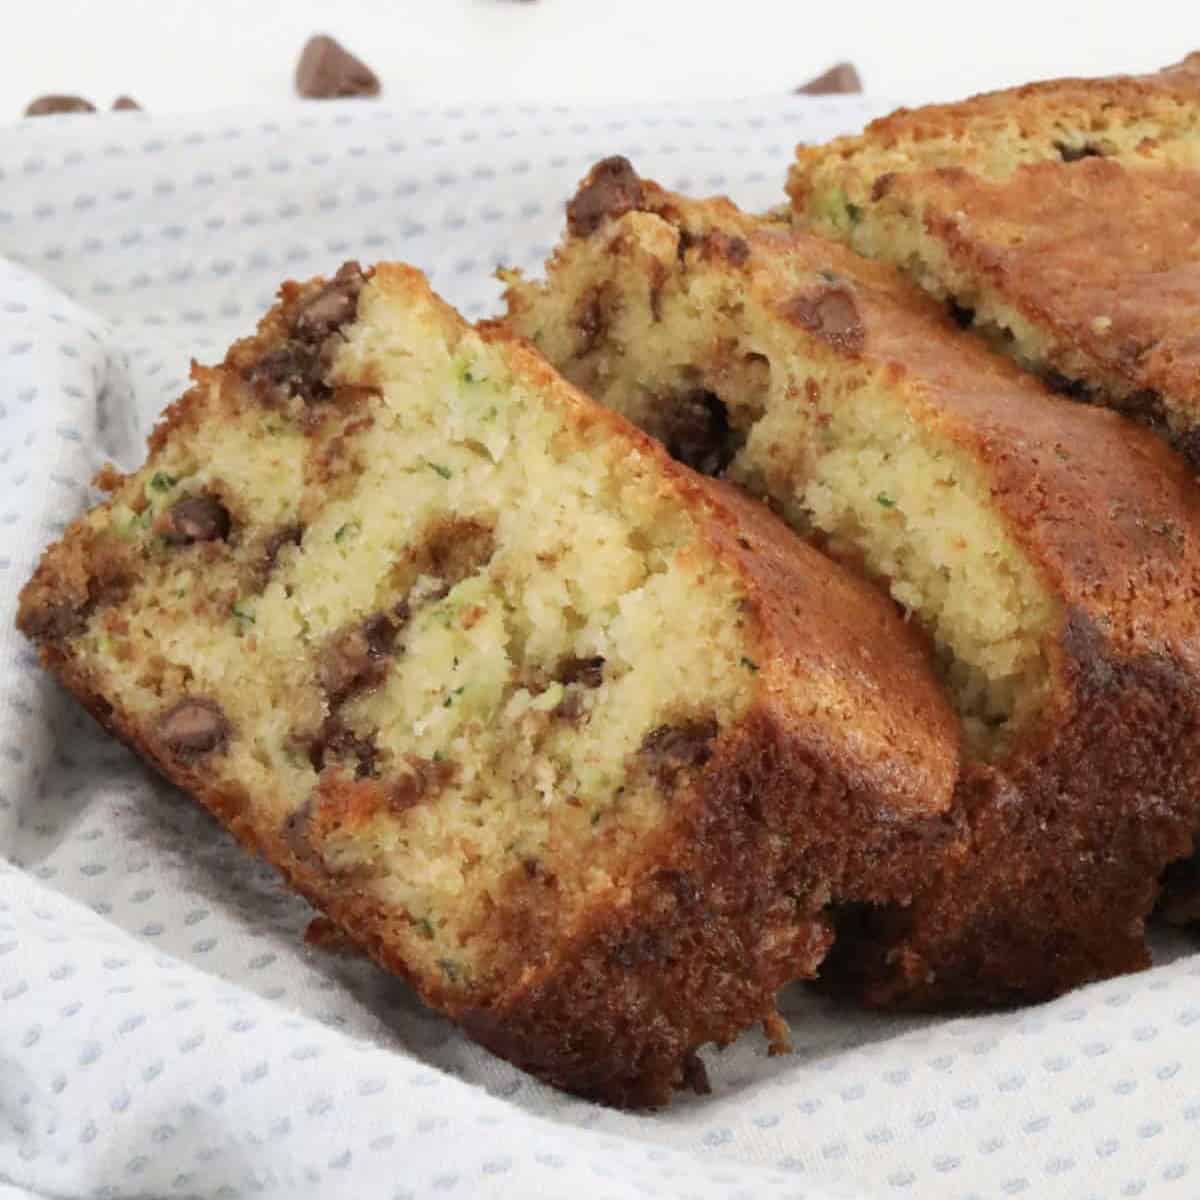 Slices of Zucchini bread with chocolate chips.